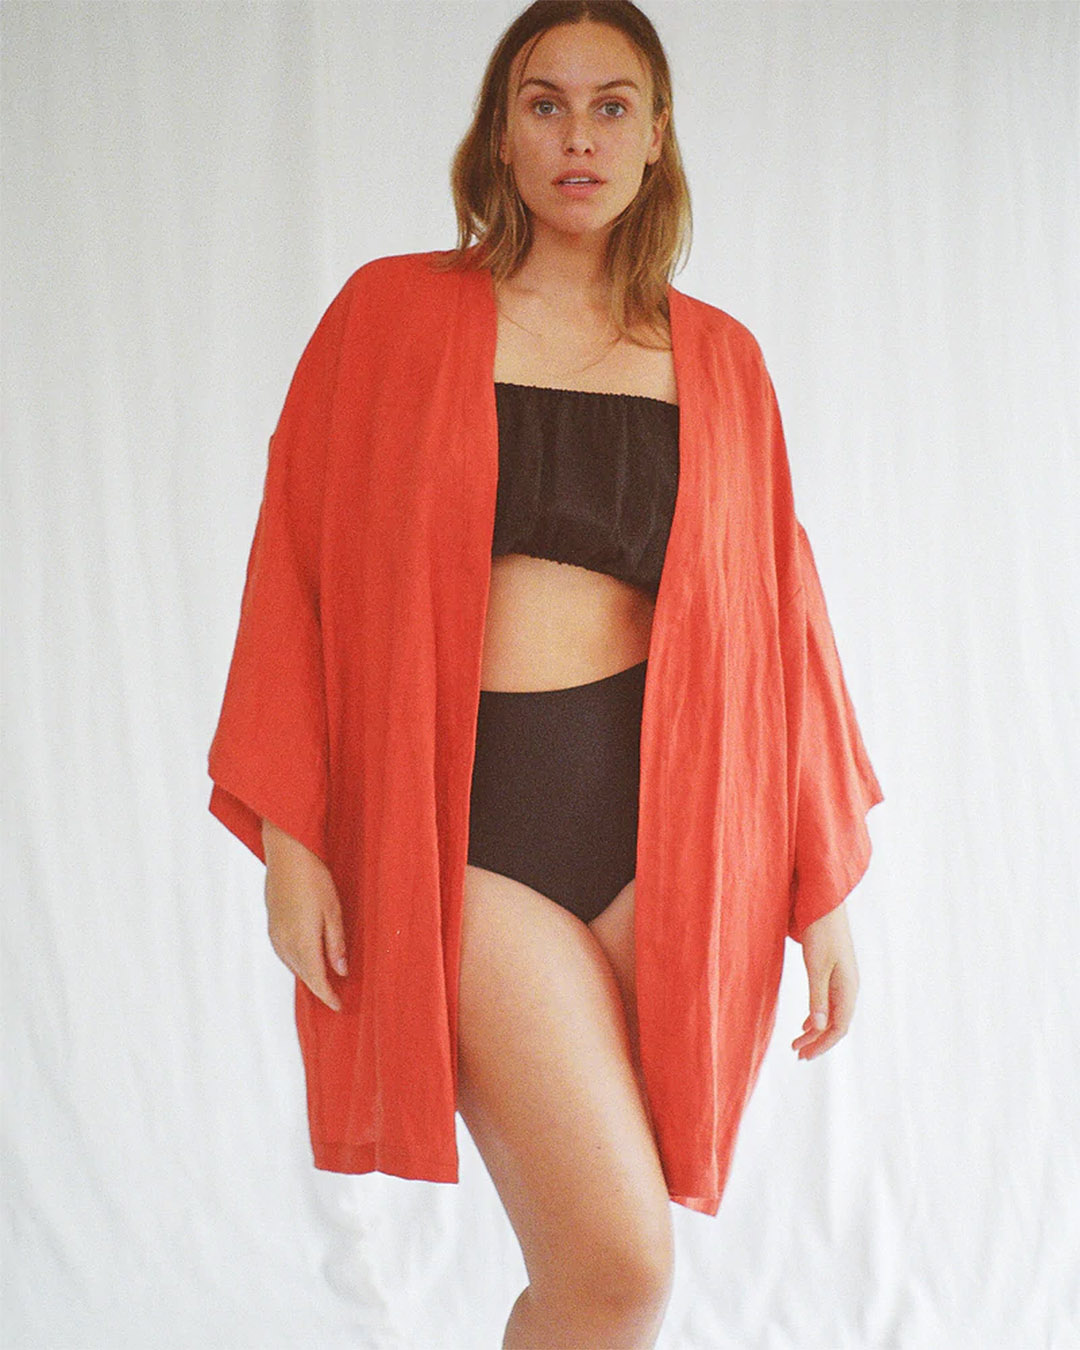 A woman wearing an orange kimono-style dress over brown high-waisted separates. 